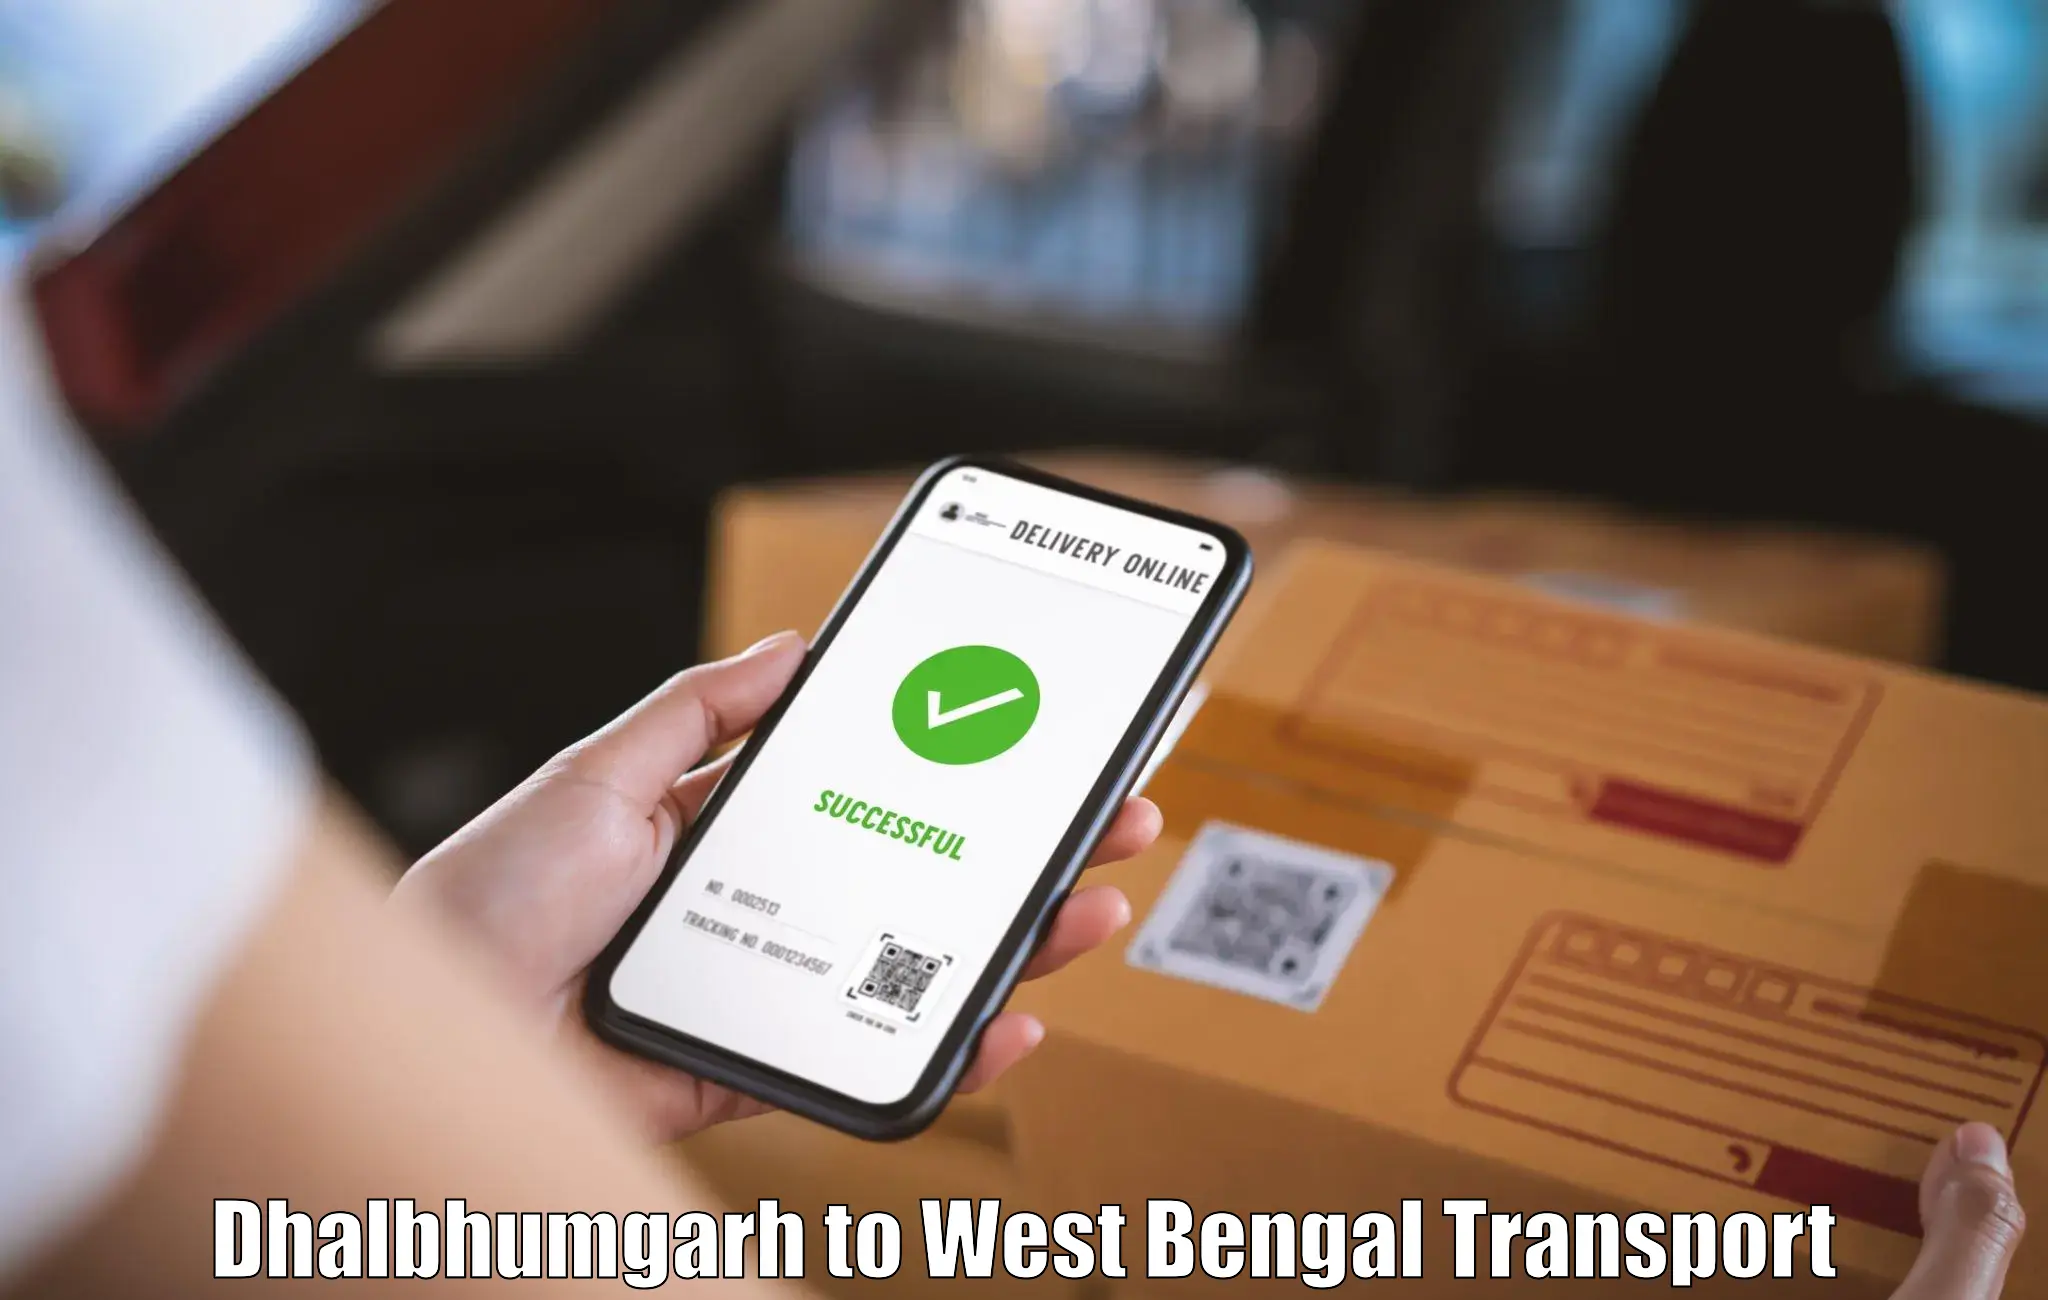 Lorry transport service Dhalbhumgarh to West Bengal